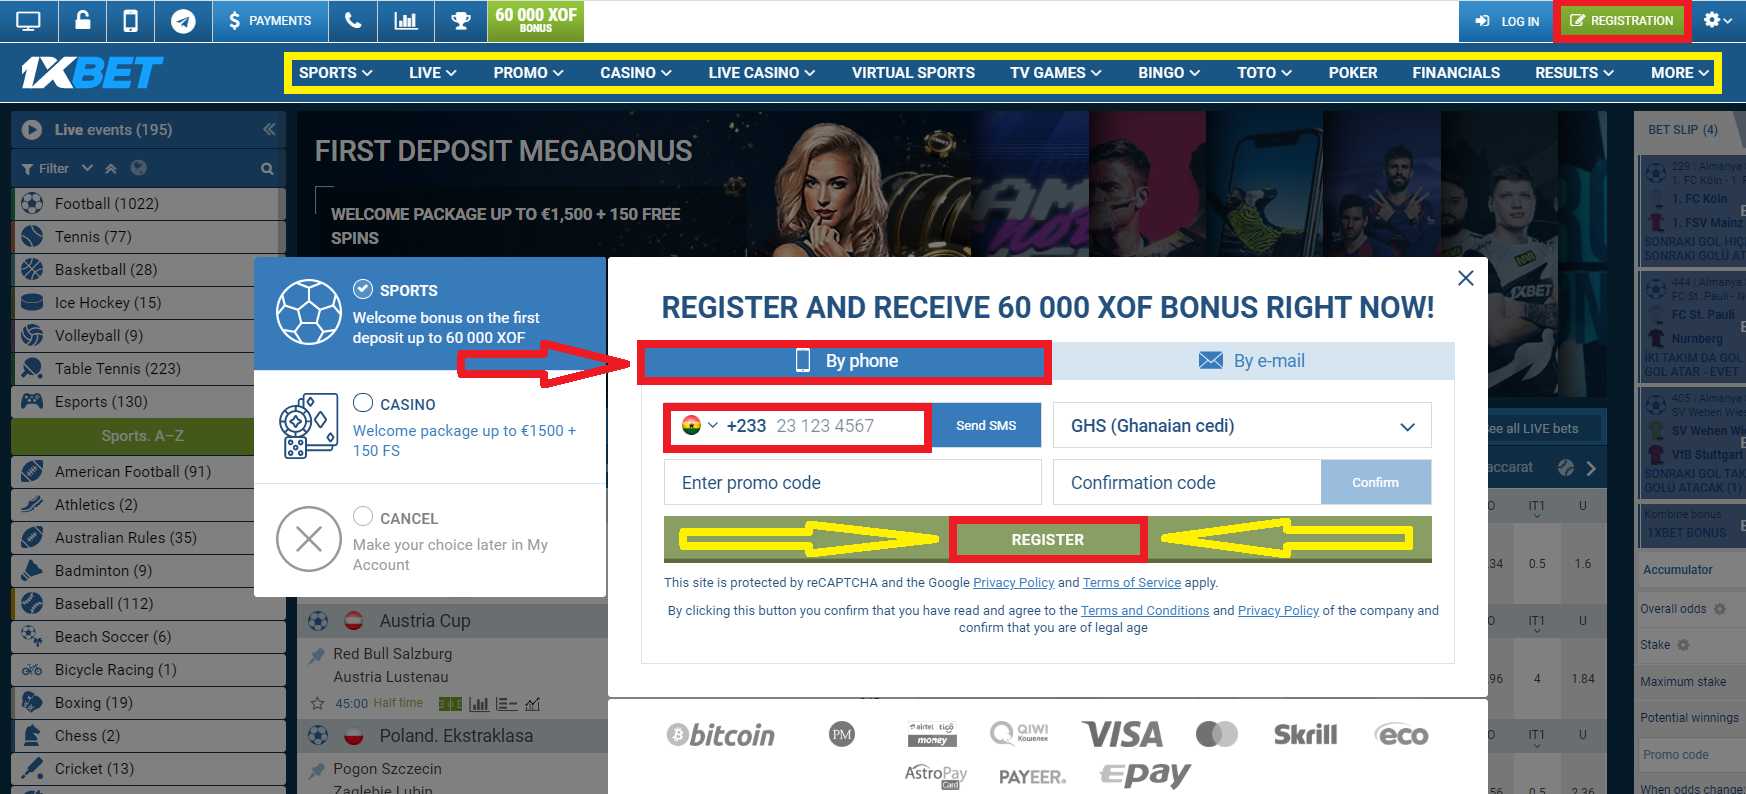 Quick and easy 1xBet login method